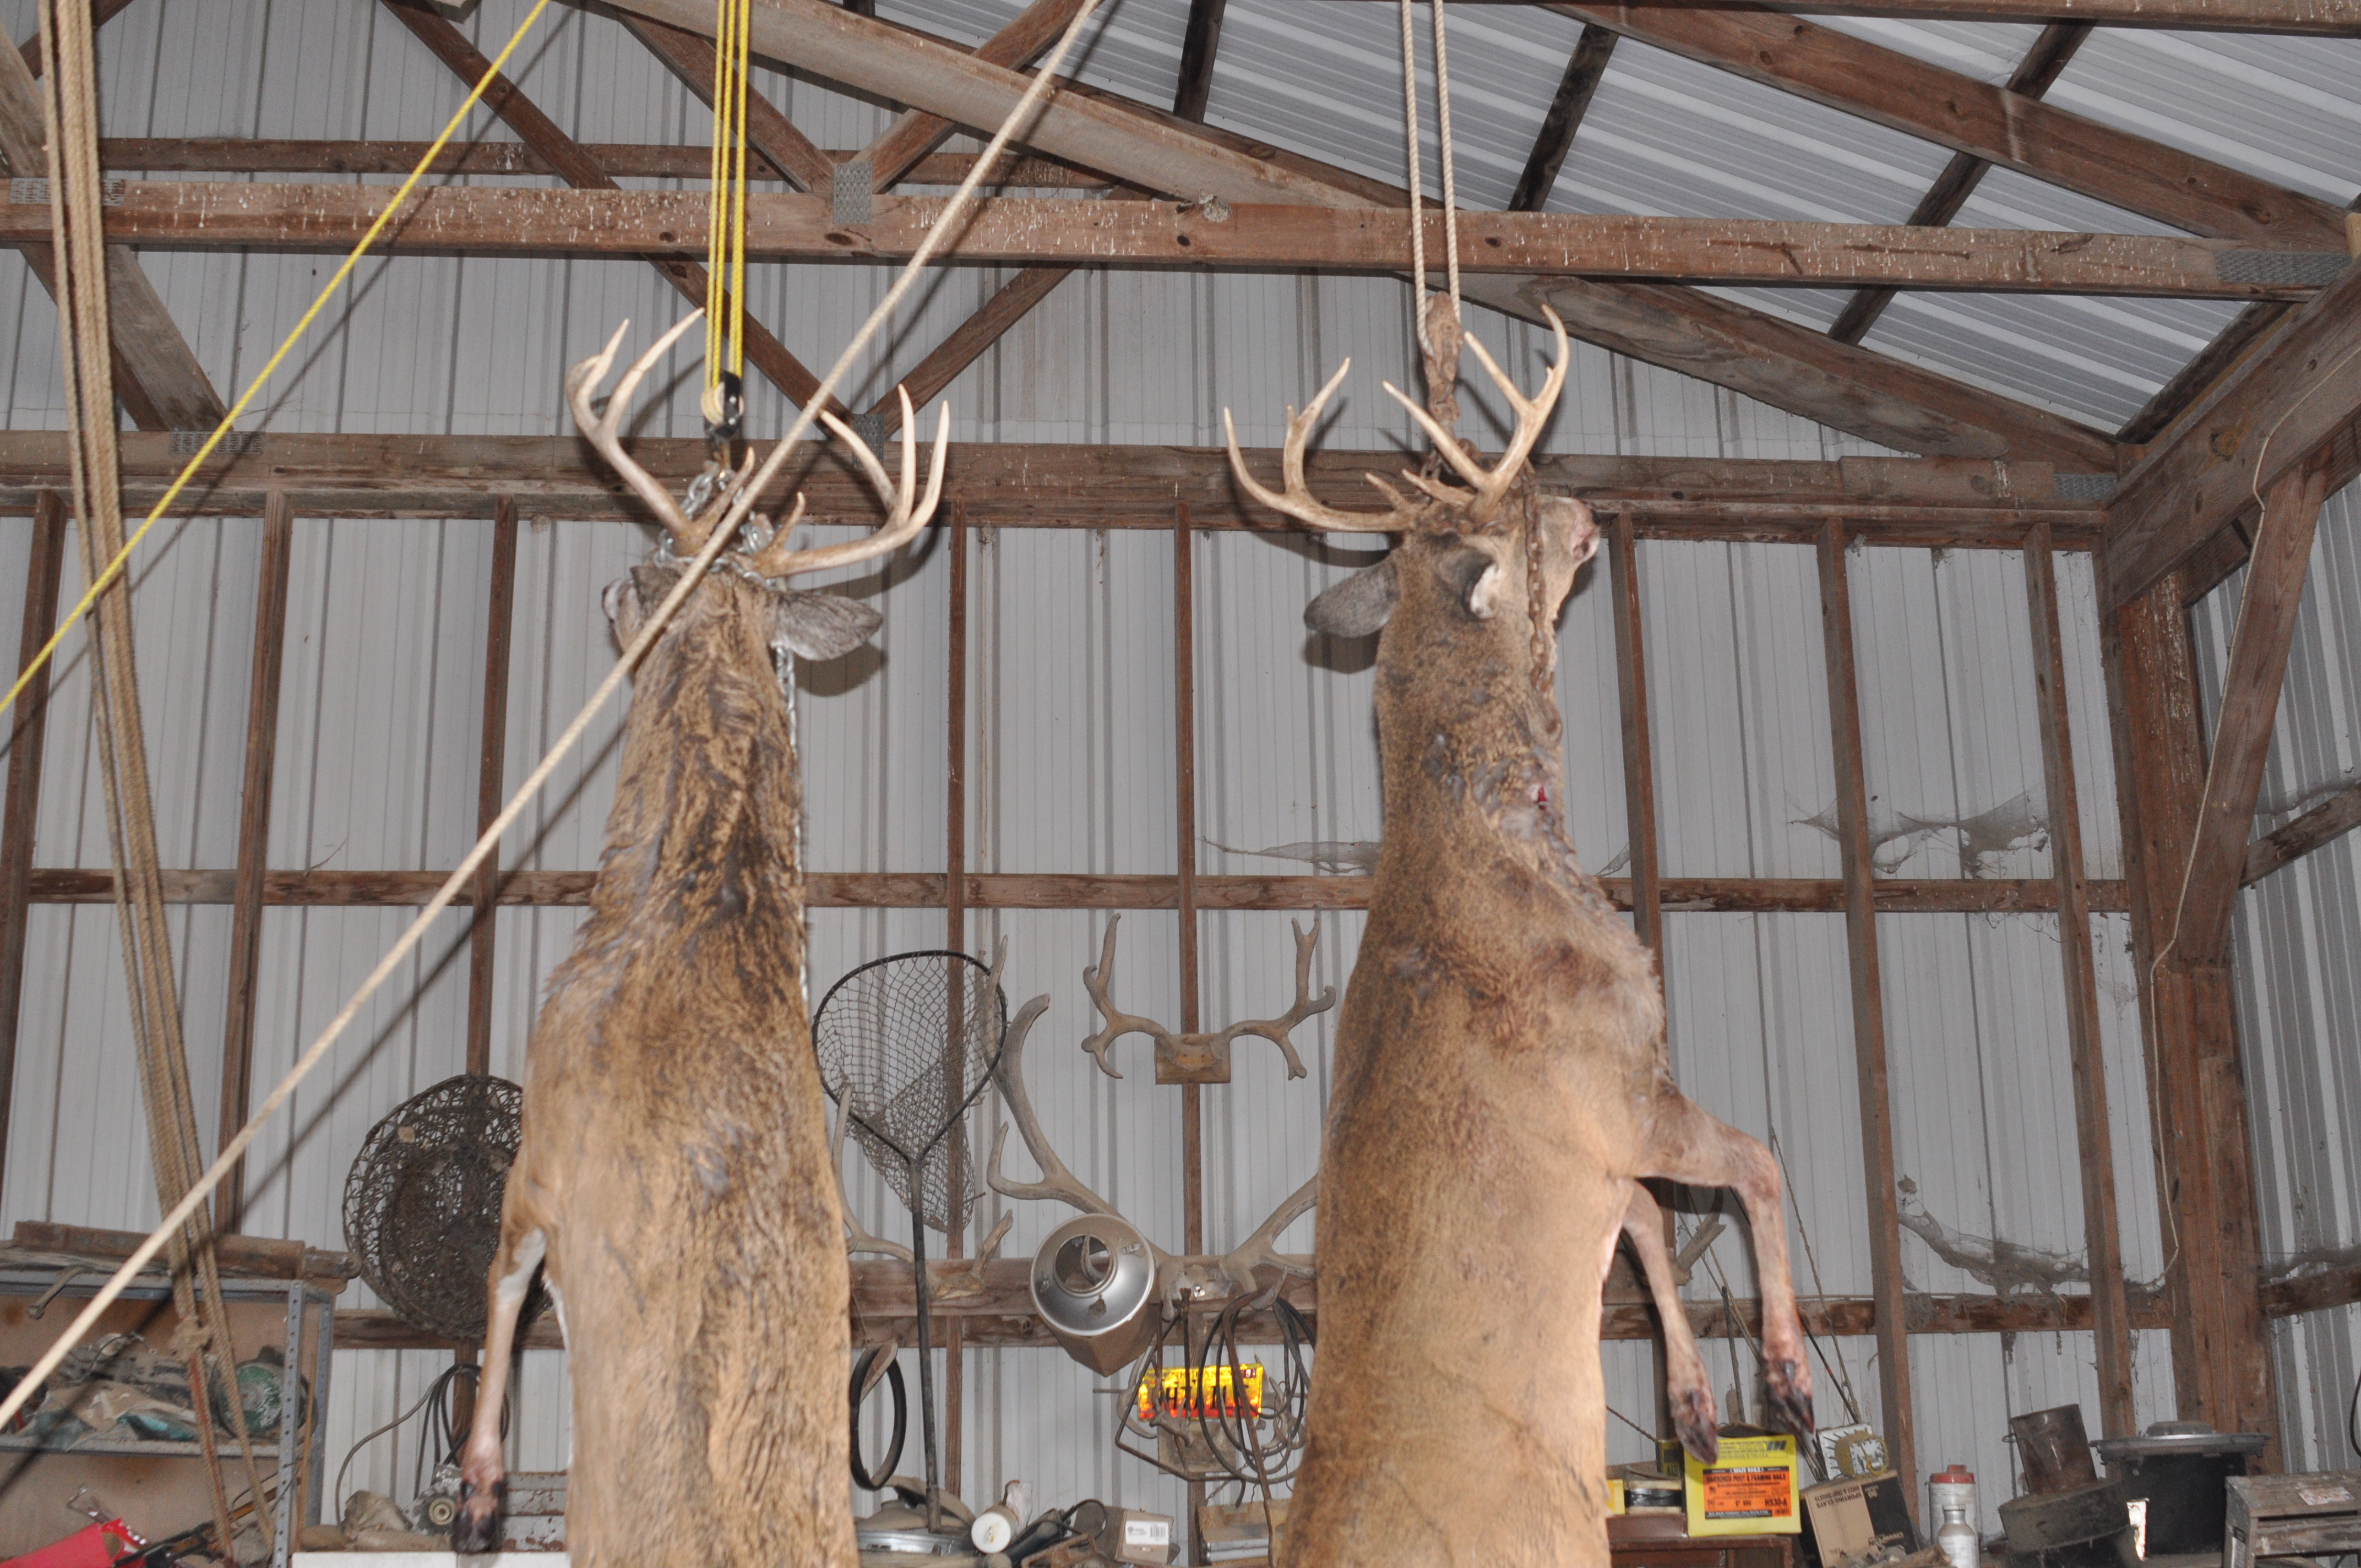 How Does Venison Go Bad? The Science Behind Why Venison Spoils